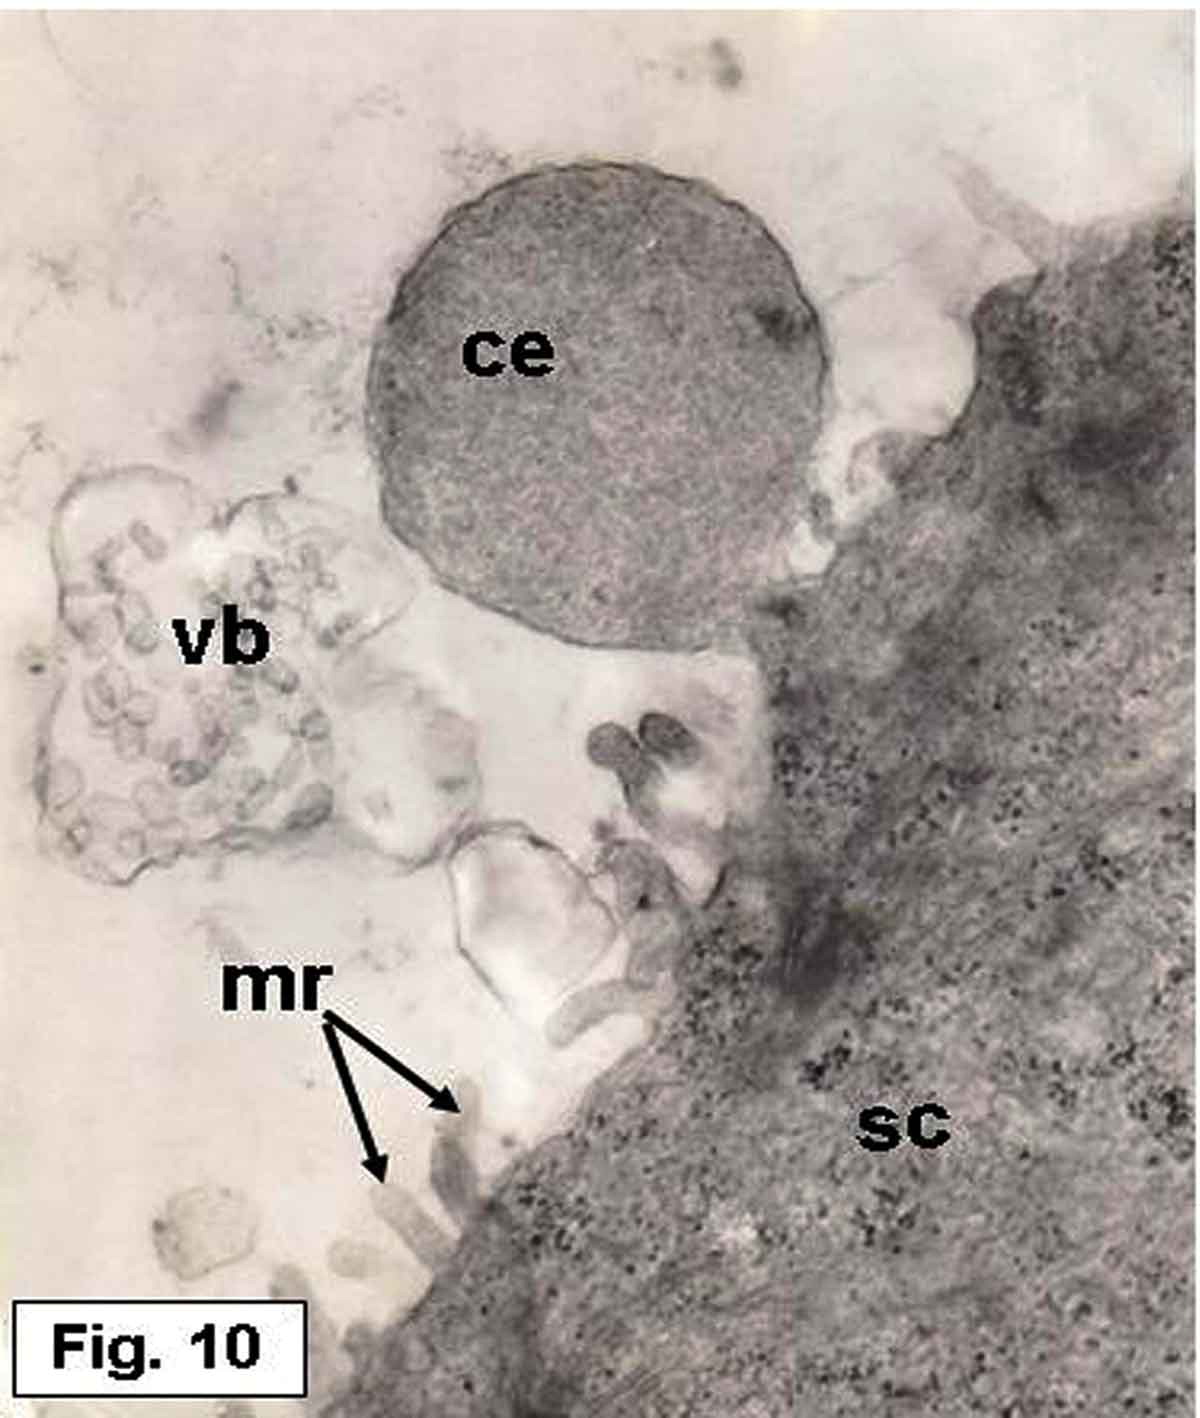 Figure 10. Hypophthalmichthys molitrix, 7 days after hatching. TEM micrograph of the saccular sensory epithelium, showing cytoplasmic extrusion (ce) projecting from supporting cell (sc) and still in contact with its apical surface. Secretory materials, as vesicular bodies (vb) containing small spherules, seemed to be librated from supporting cell. Note the microridges (mr) of the supporting cell. 17,000×.